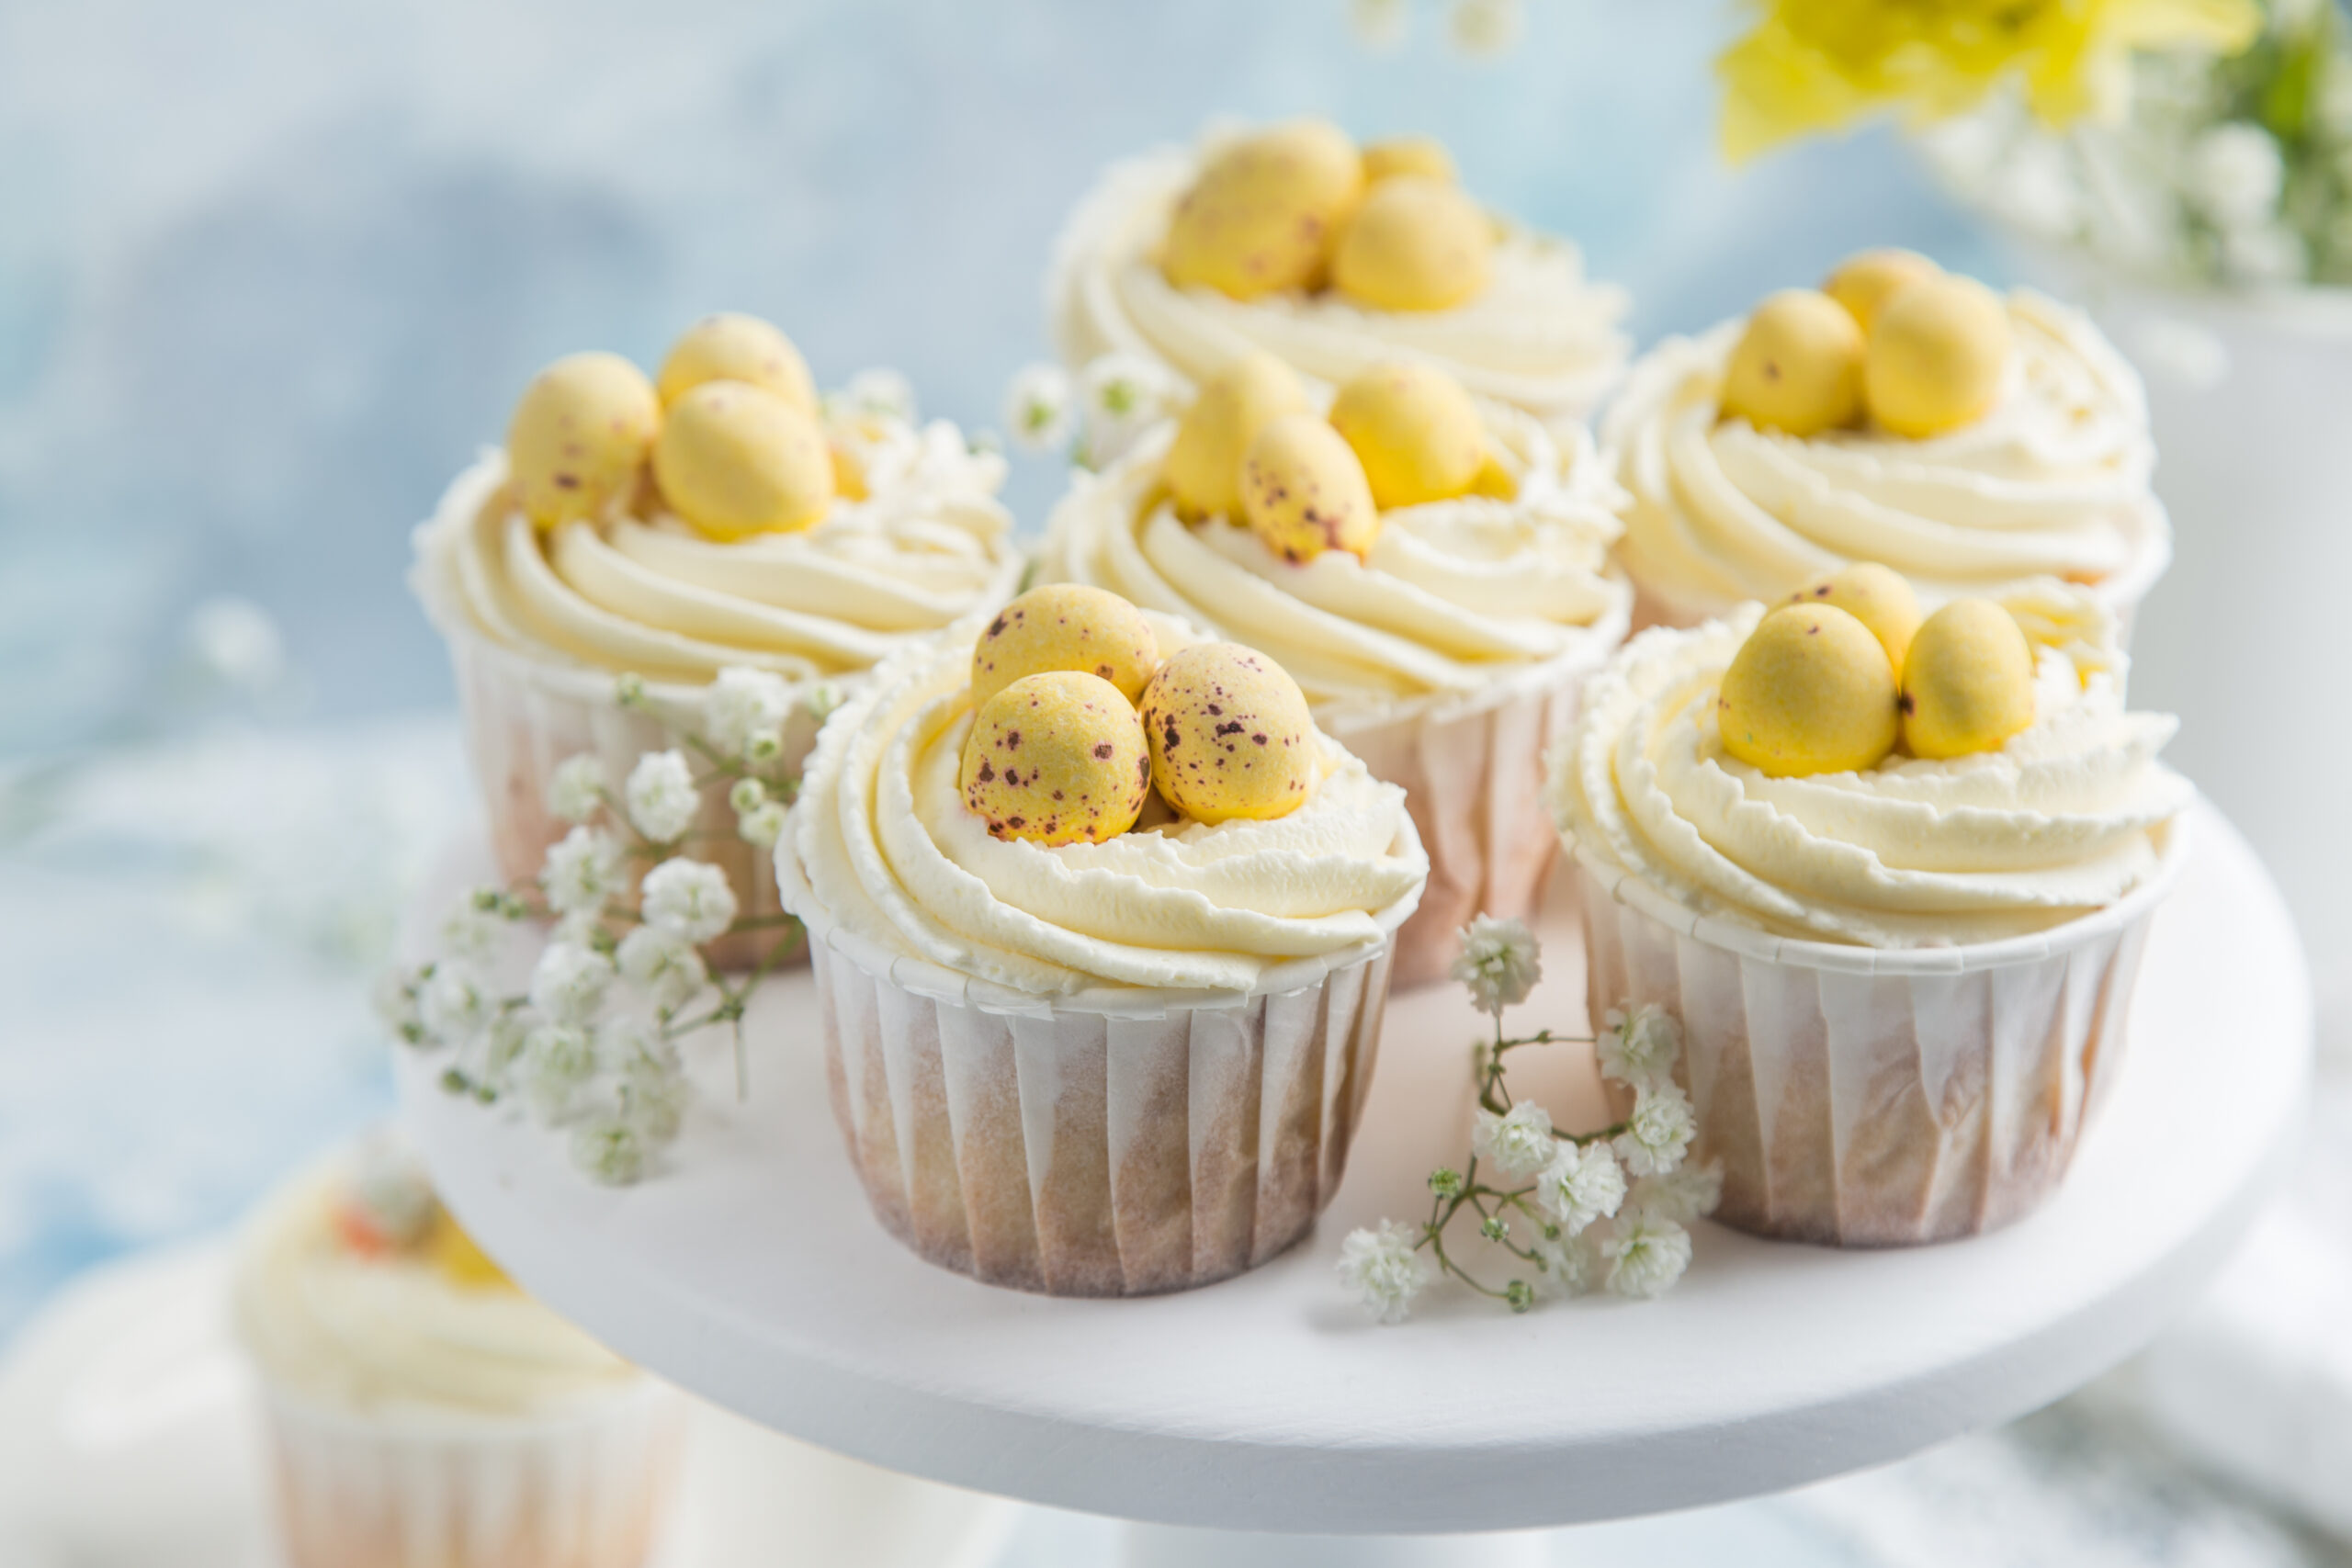 Dive into my blog for the ultimate Easy Yellow Vanilla Easter Cupcakes that'll have everyone hopping for seconds! Get expert tips, tricks, and a fail-proof cupcake guide for a sweet Easter treat that's as fun to make as it is to eat. 🧁✨